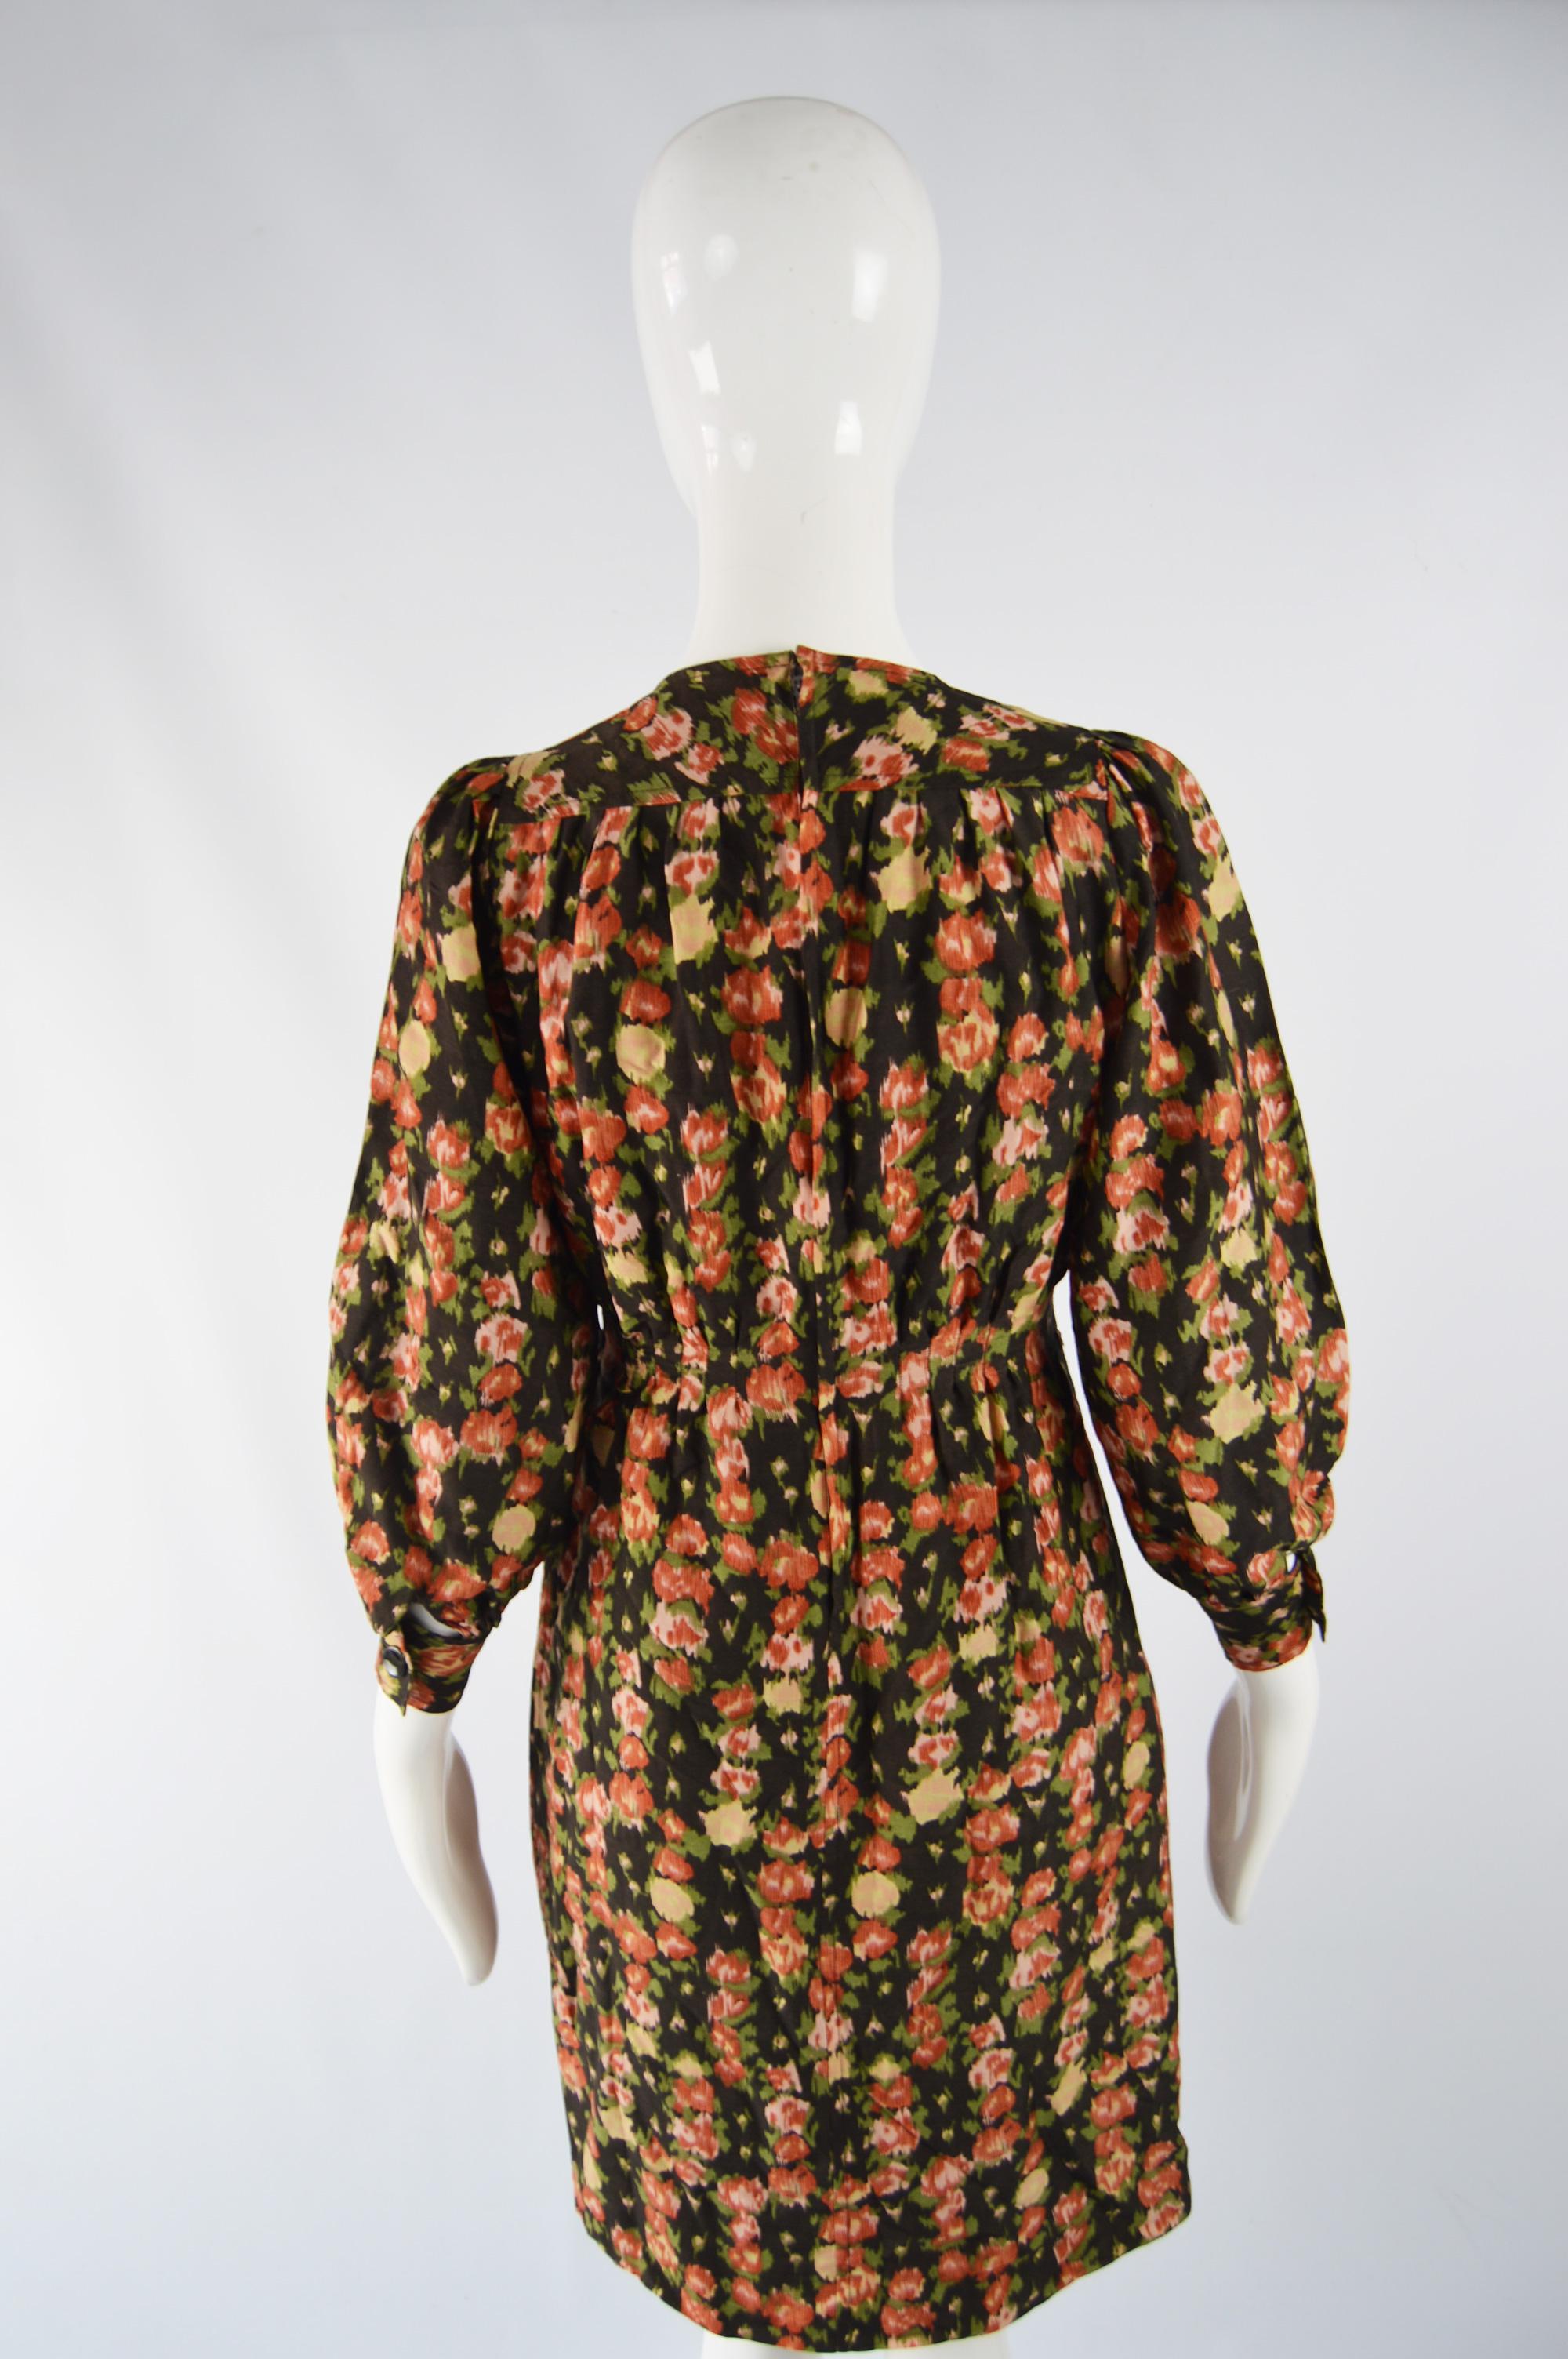 Emanuel Ungaro Vintage Puff Sleeve Floral Dress In Good Condition For Sale In Doncaster, South Yorkshire